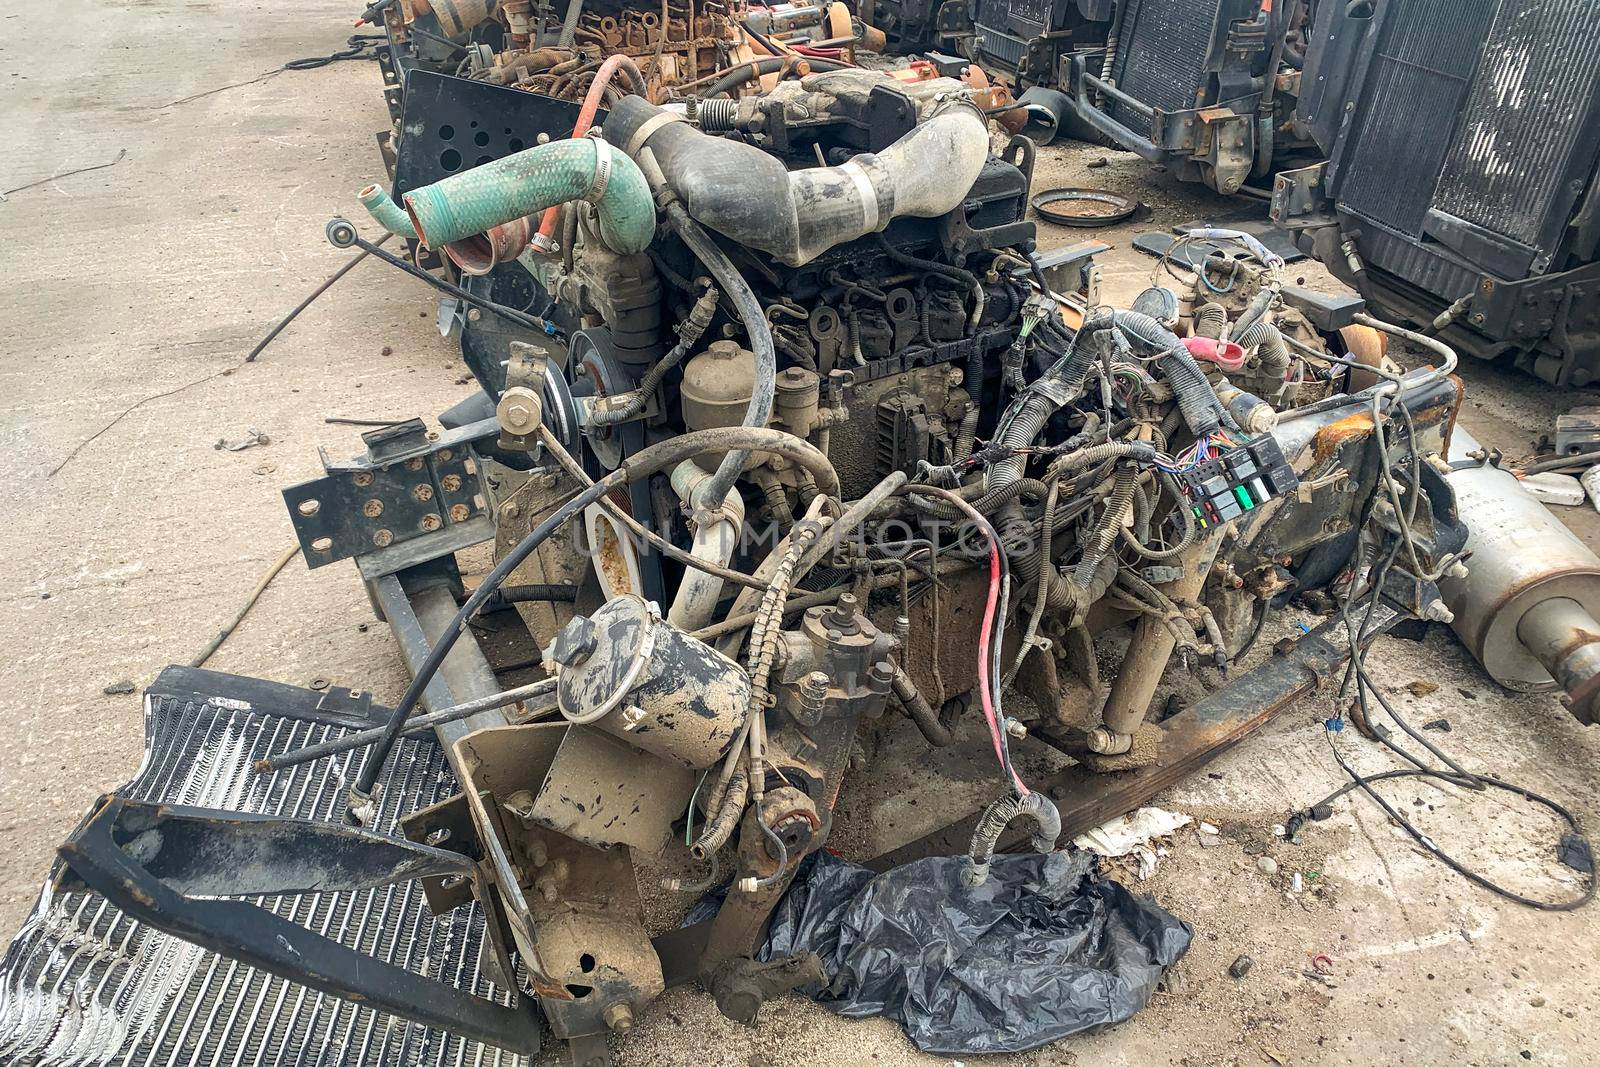 An internal combustion engine removed from a car and resting on the ground in a automotive wrecking by Khosro1